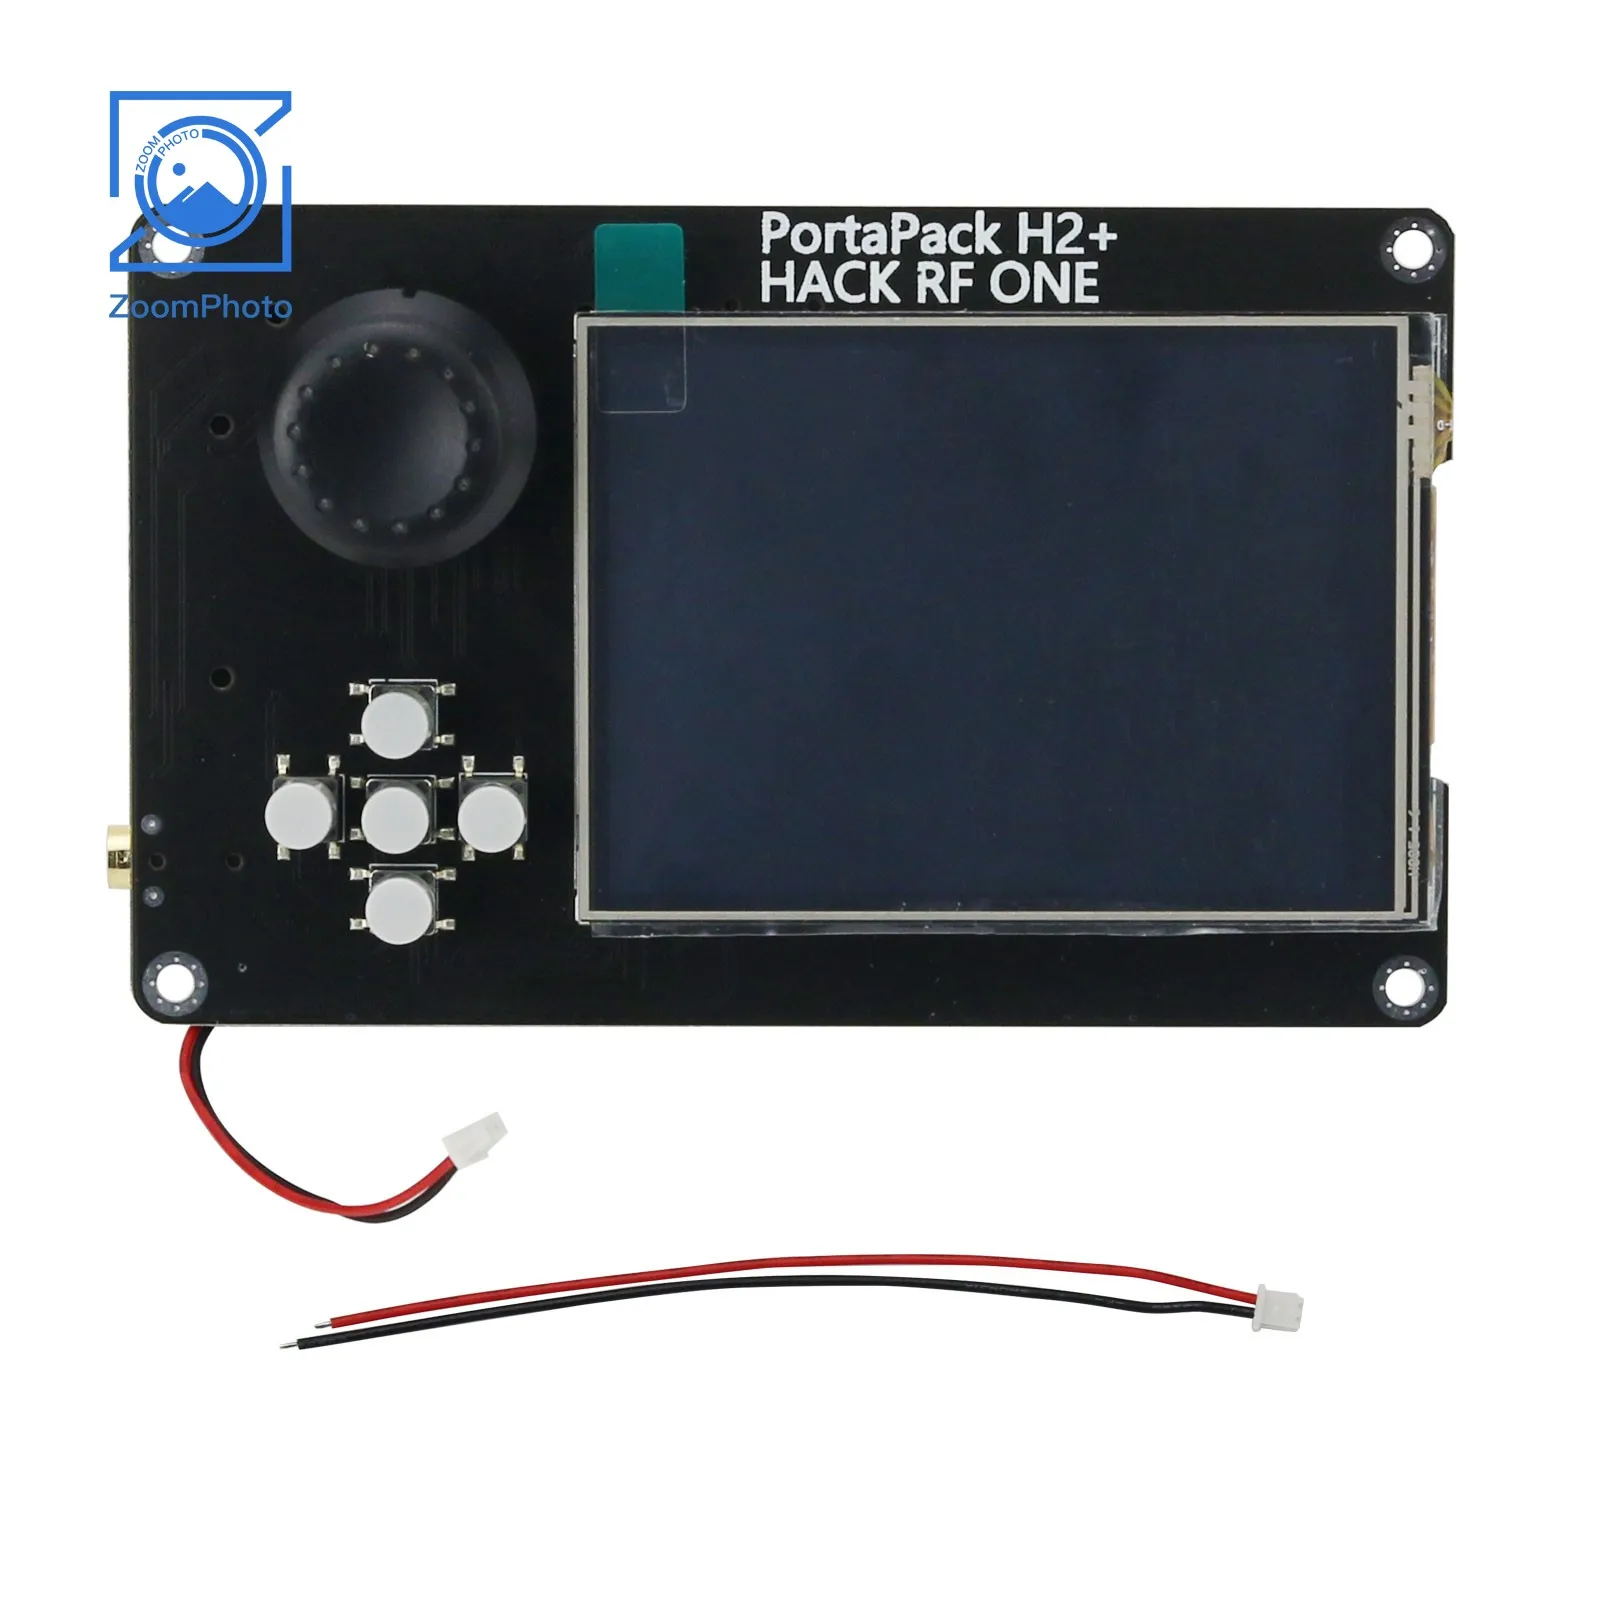 

PortaPack H2 For HackRF One SDR + 0.5ppm TCXO + 1500mAh Battery + 3.2" LCD Touch Display